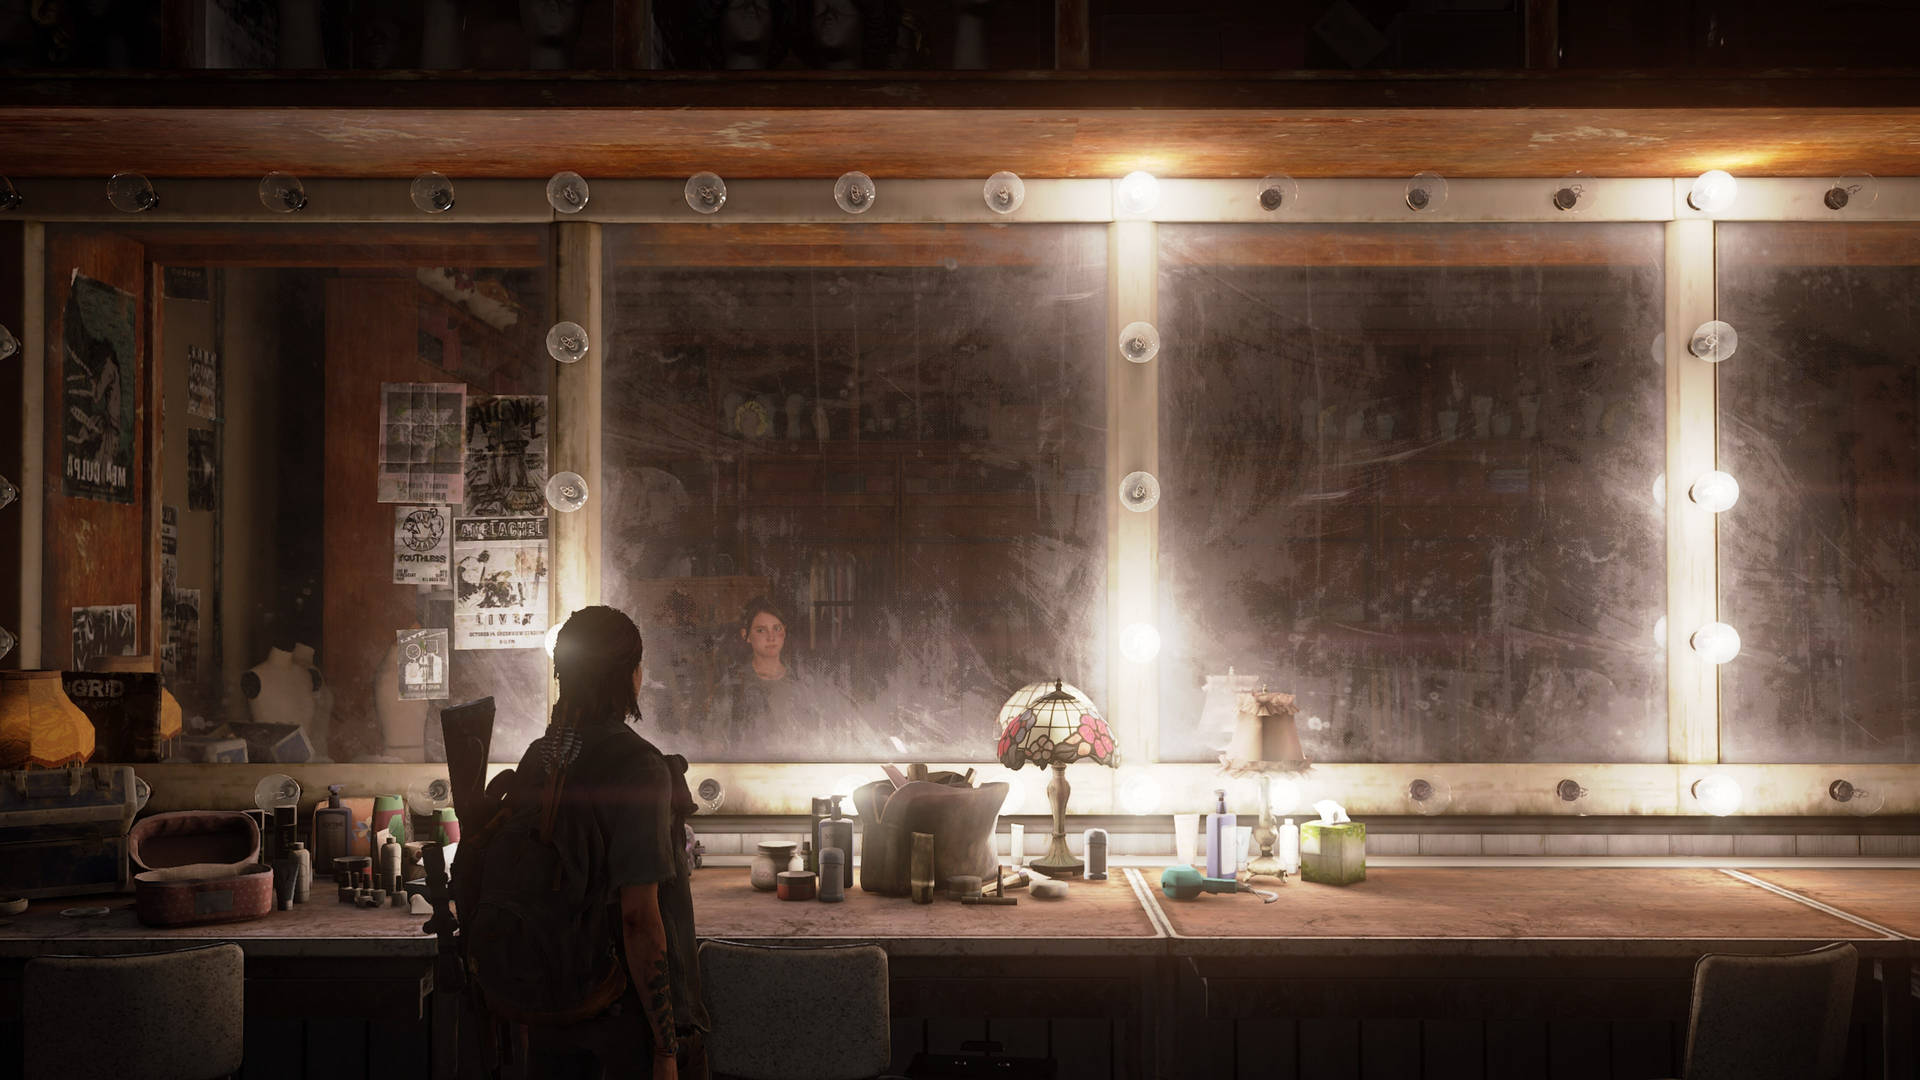 Ellie Looking At Reflection In The Last Of Us 4K Wallpaper